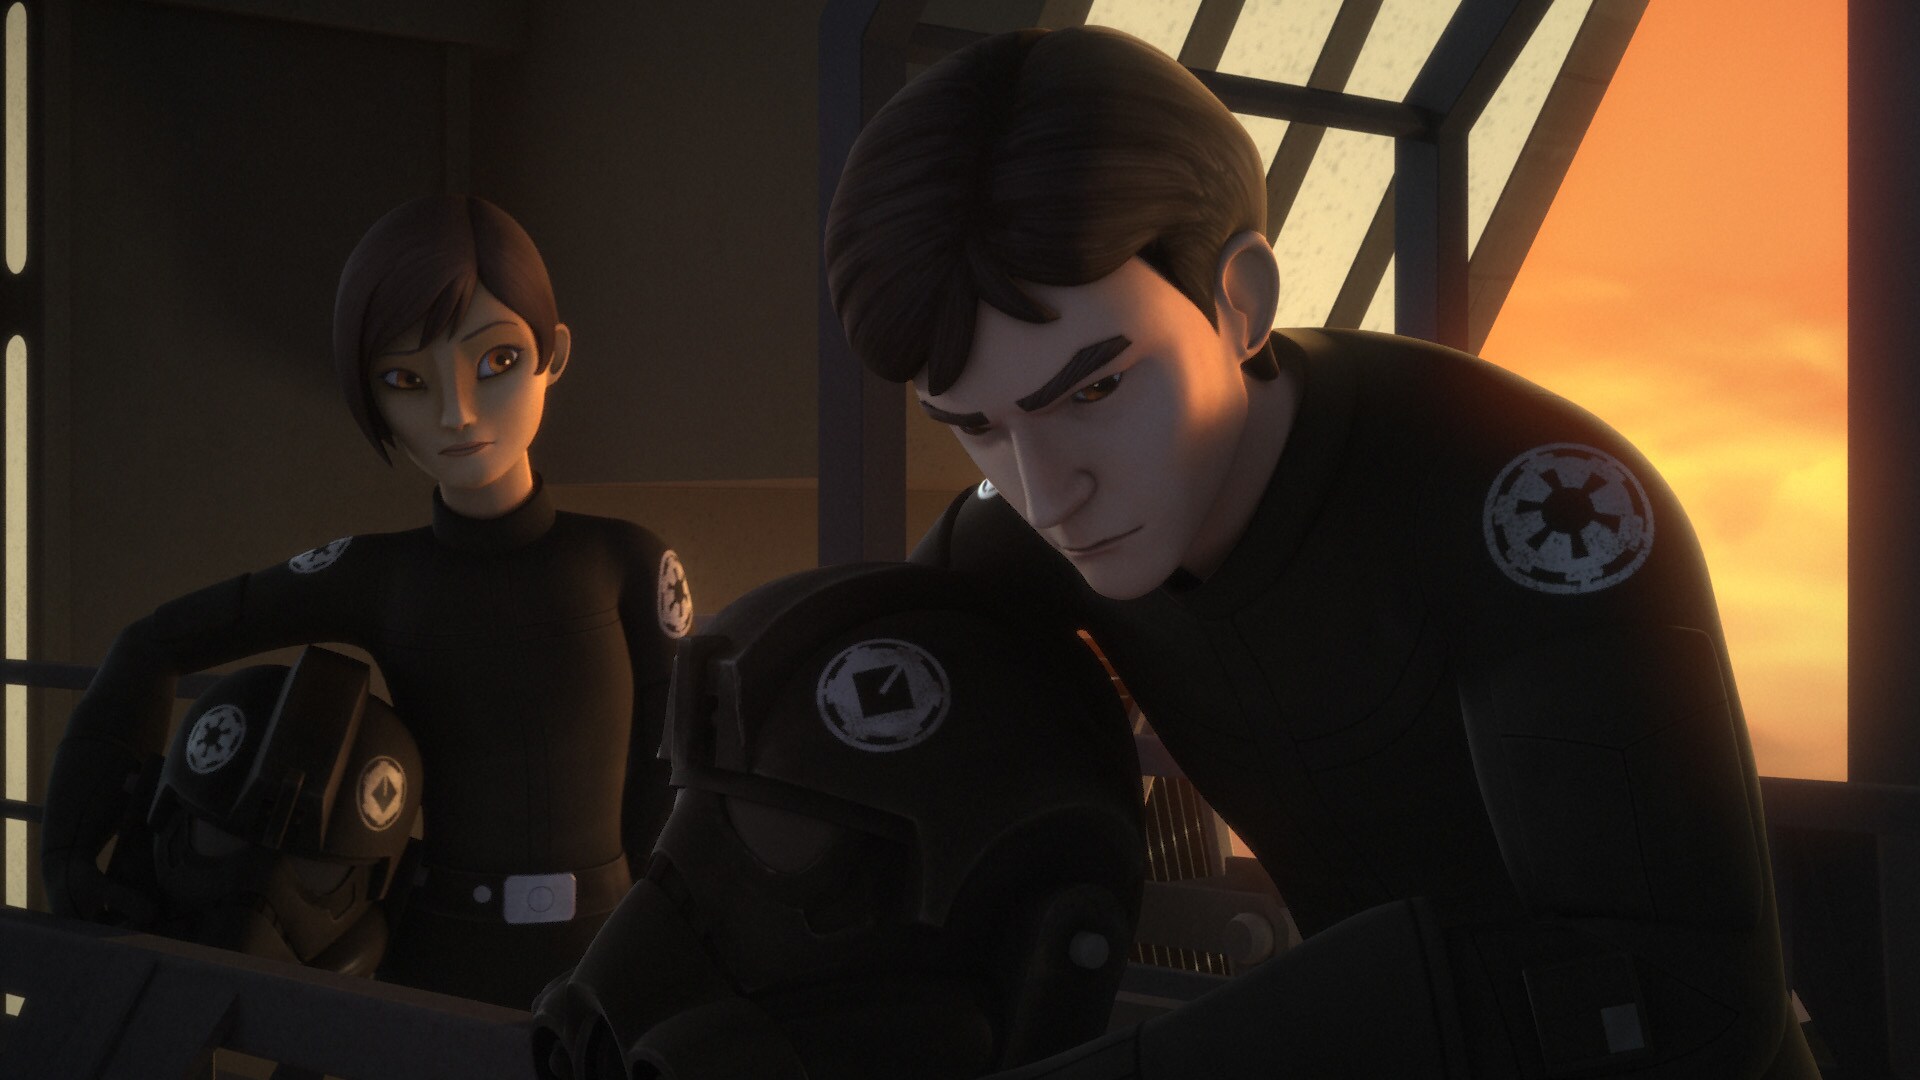 On an undercover mission infiltrating an Imperial Academy, the teen helped a young cadet named Wedge Antilles defect to the burgeoning rebellion.